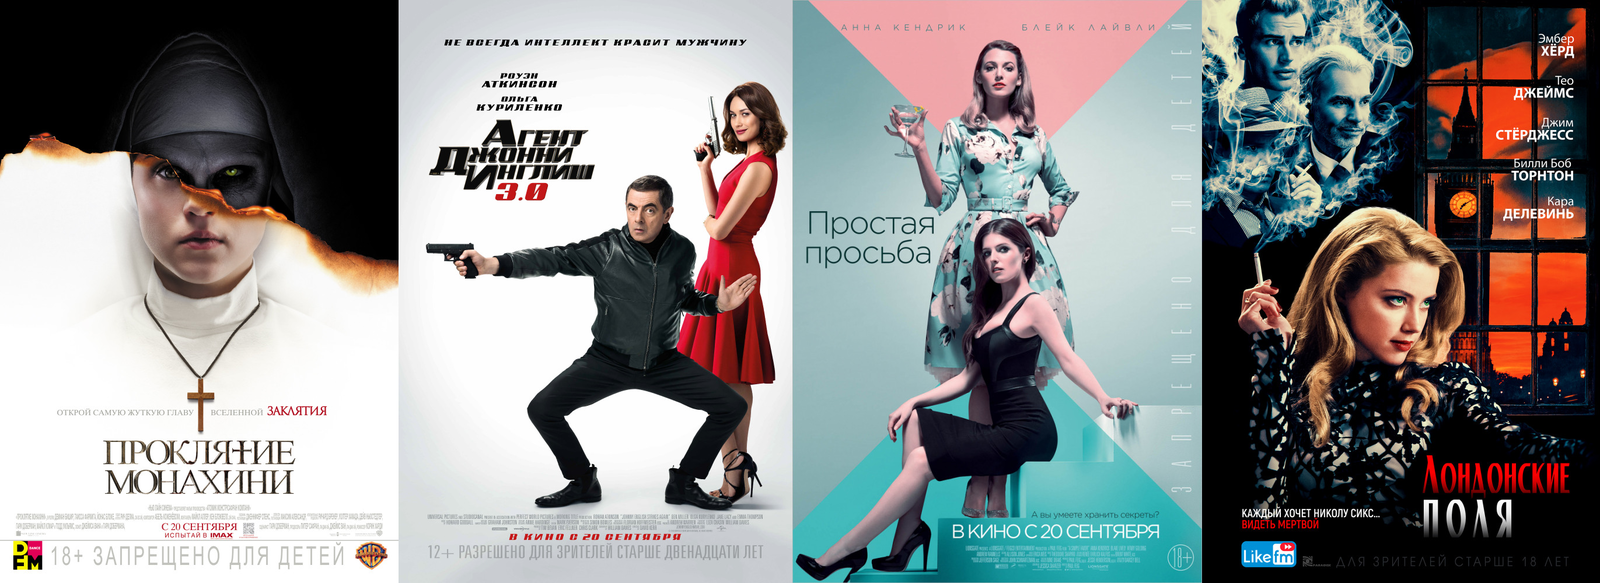 Russian box office receipts and distribution of screenings over the past weekend (September 20 - 23) - Movies, Box office fees, Film distribution, The Nun's Curse, Agent Johnny English 3, Request, 